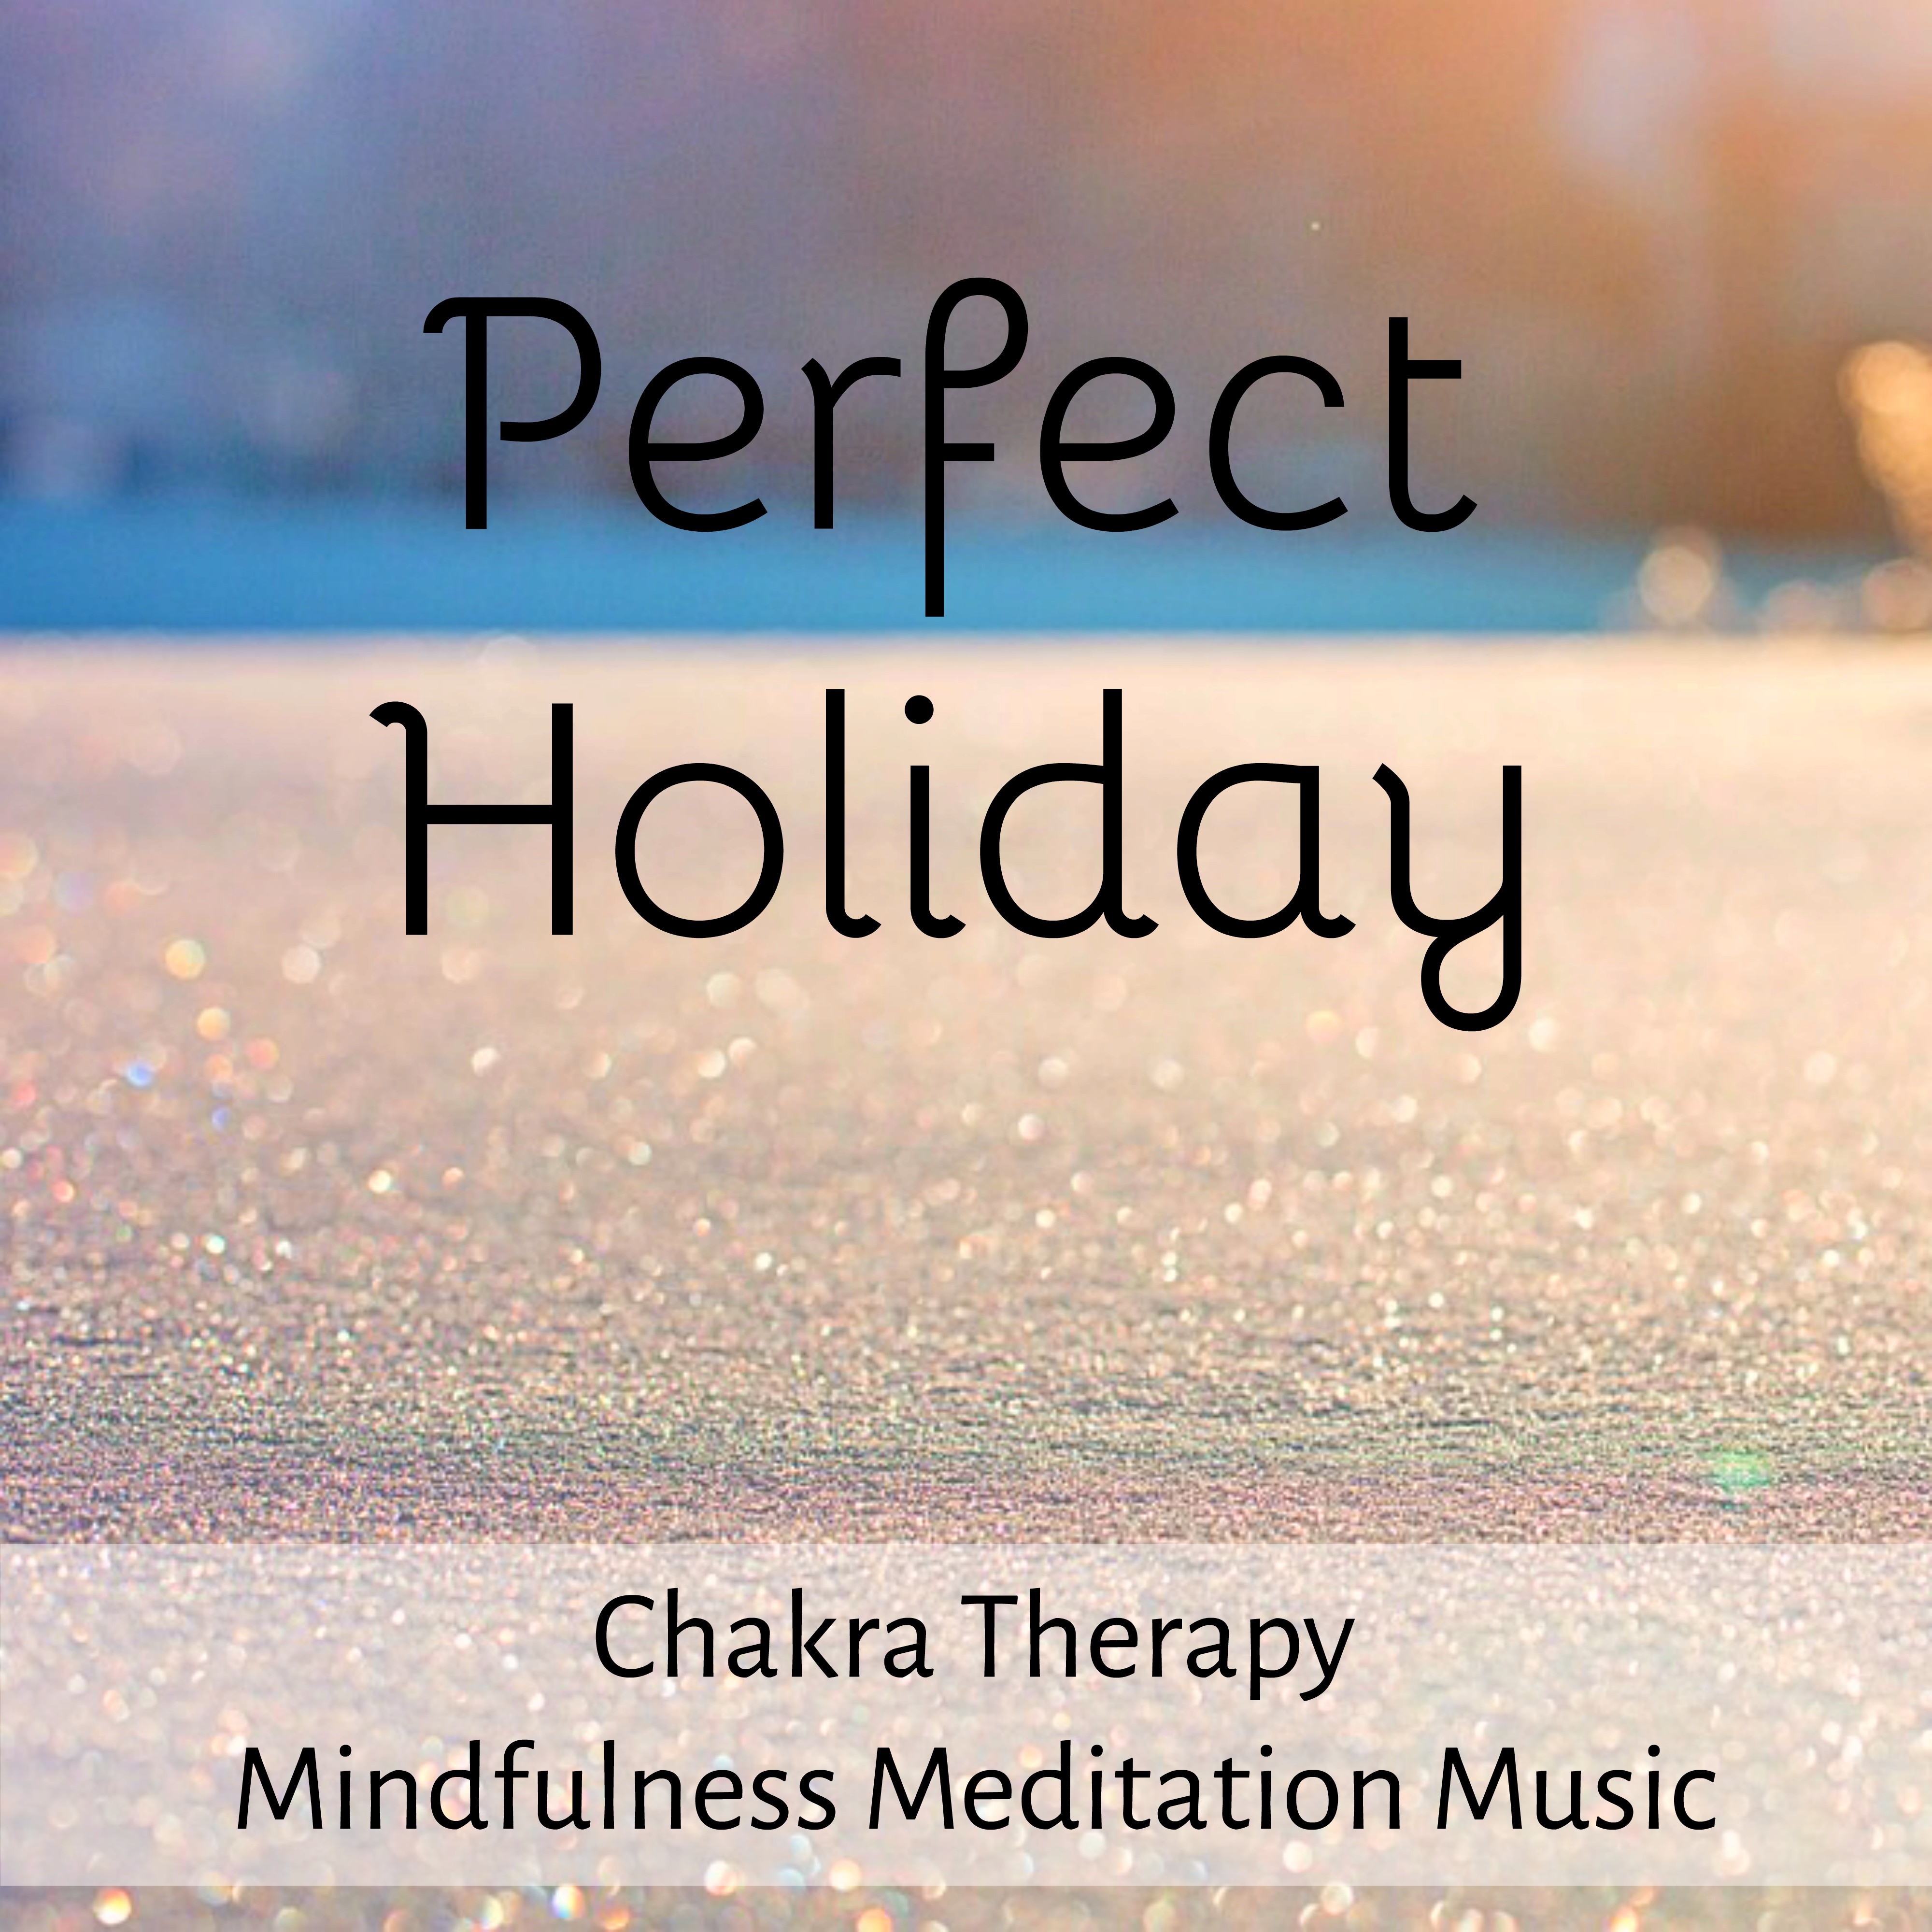 Perfect Holiday - Chakra Therapy Mindfulness Meditation Music for Sweet Winter New Year with Nature Instrumental Soft Background